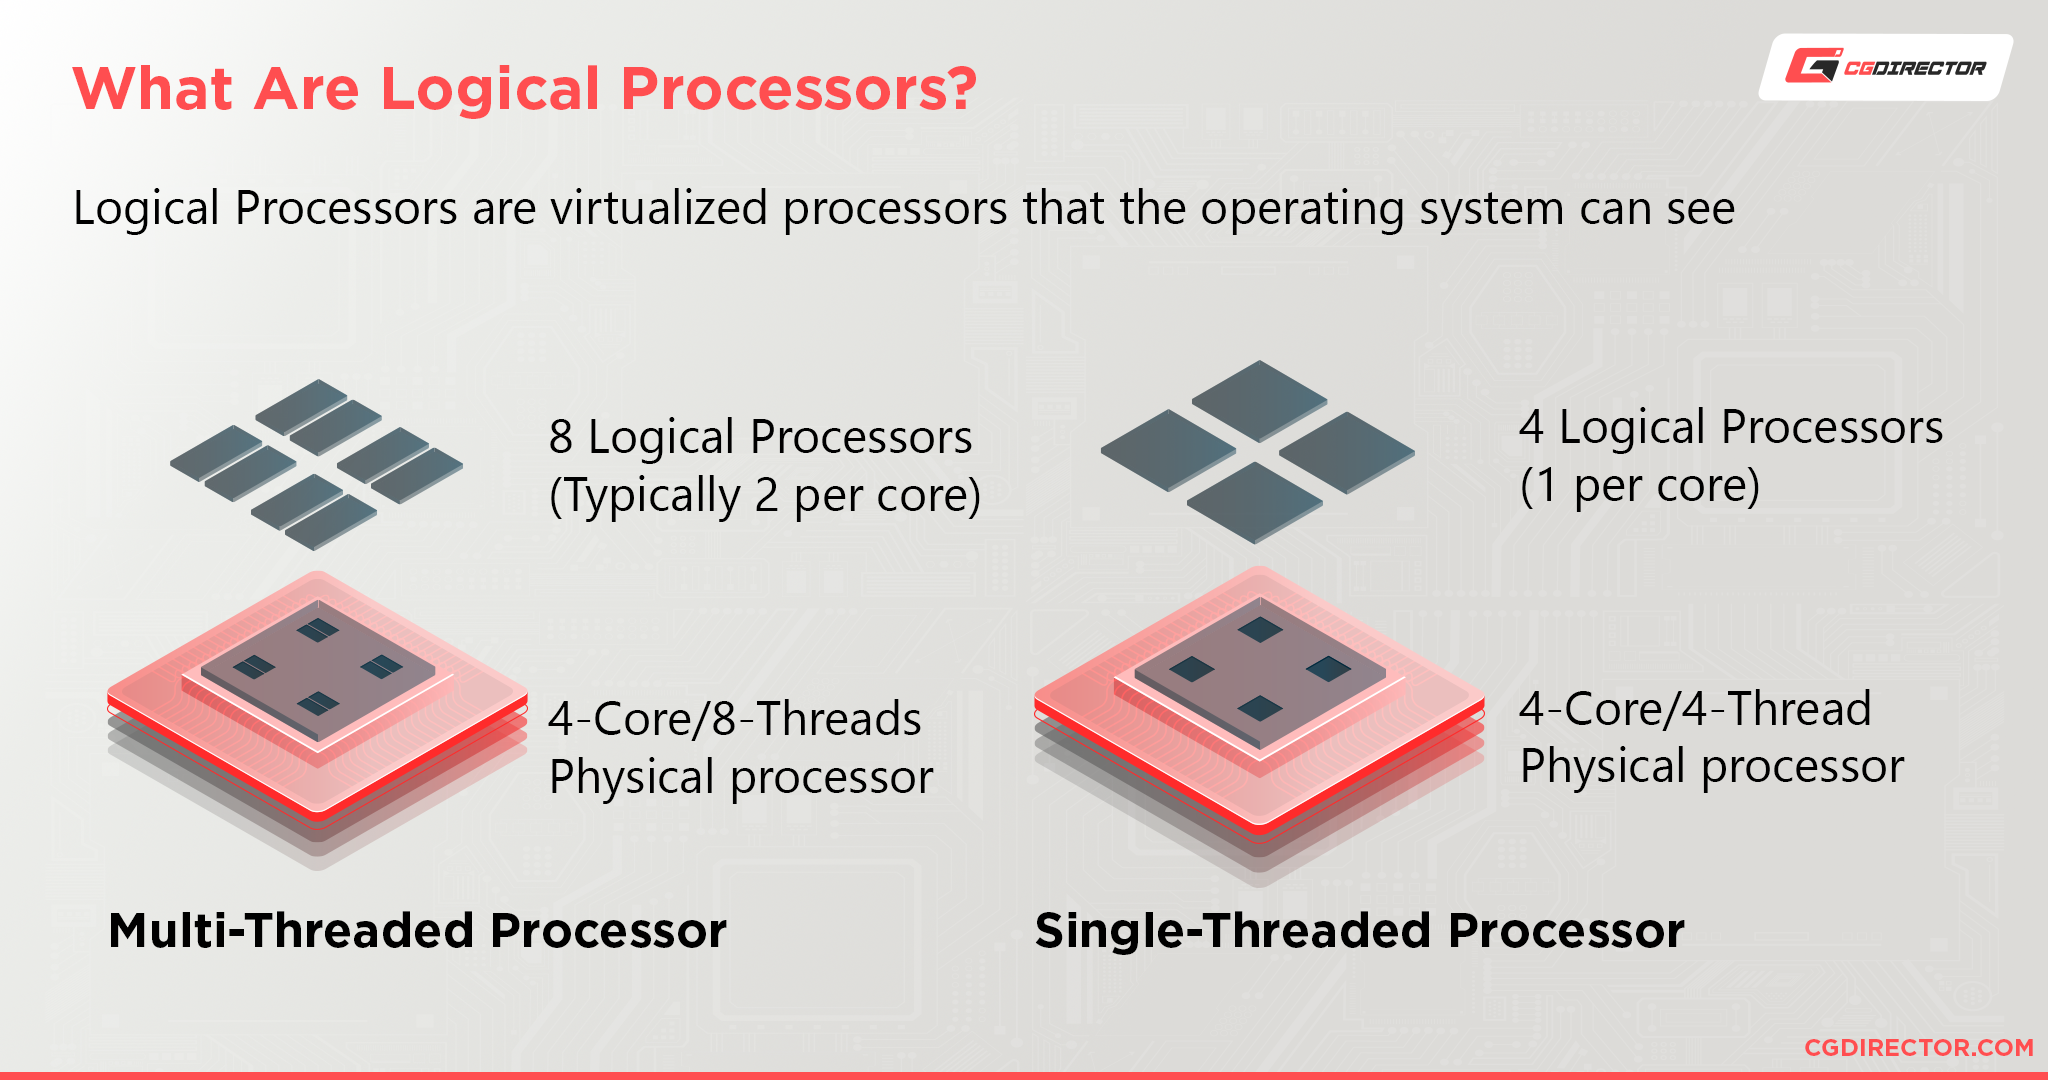 What are Logical Processors